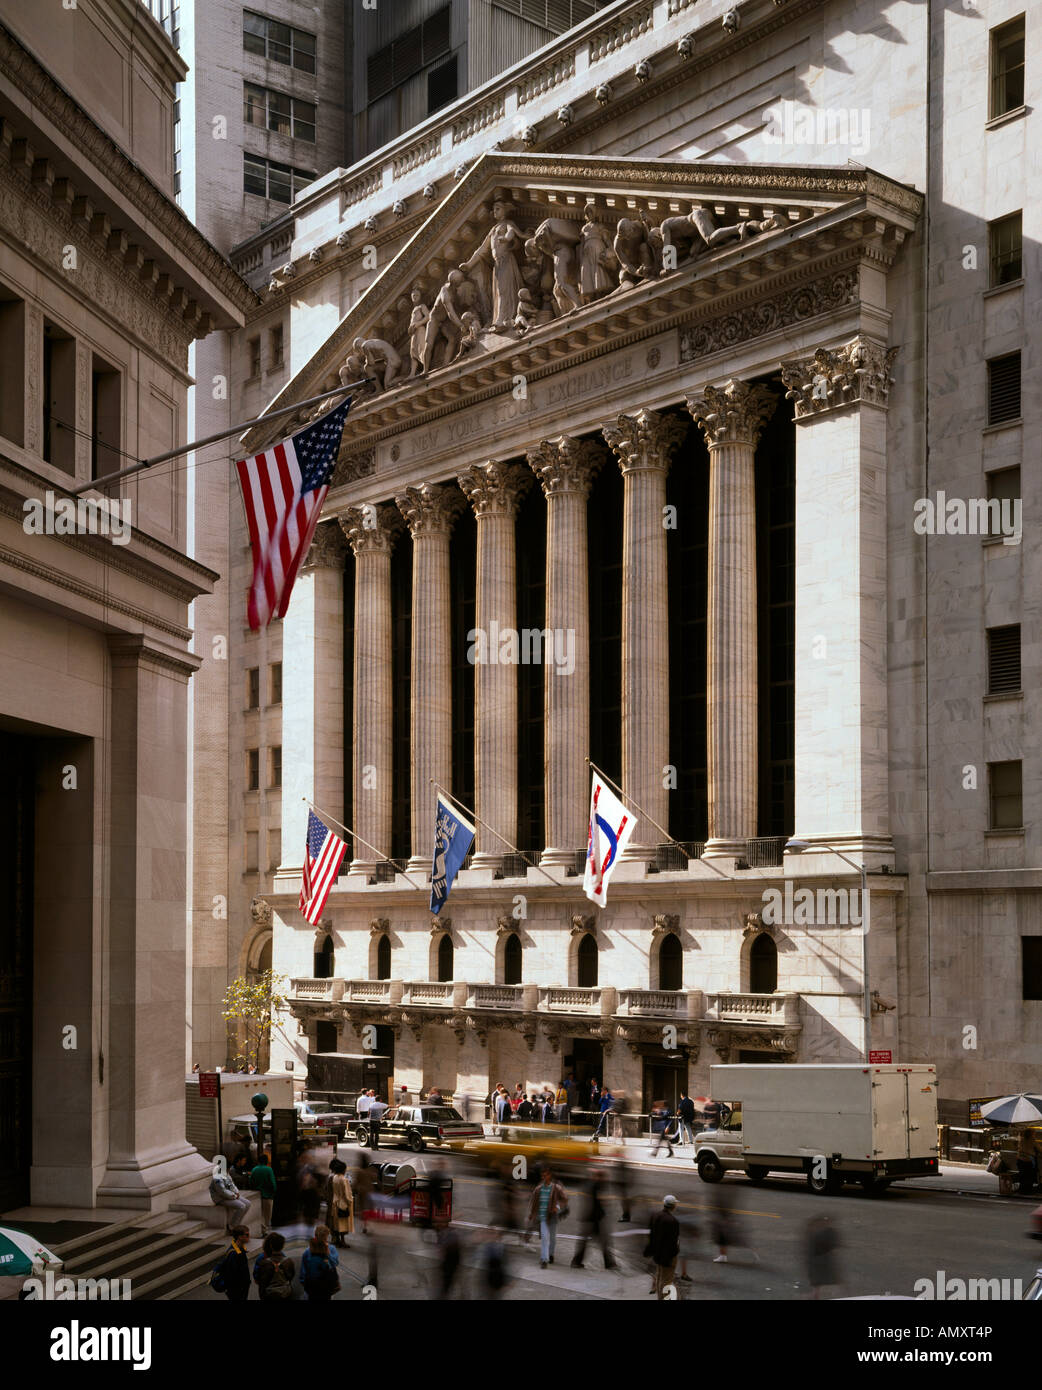 American flag out side of stock exchange building, New York Stock Exchange, New York City, New York State, USA Stock Photo